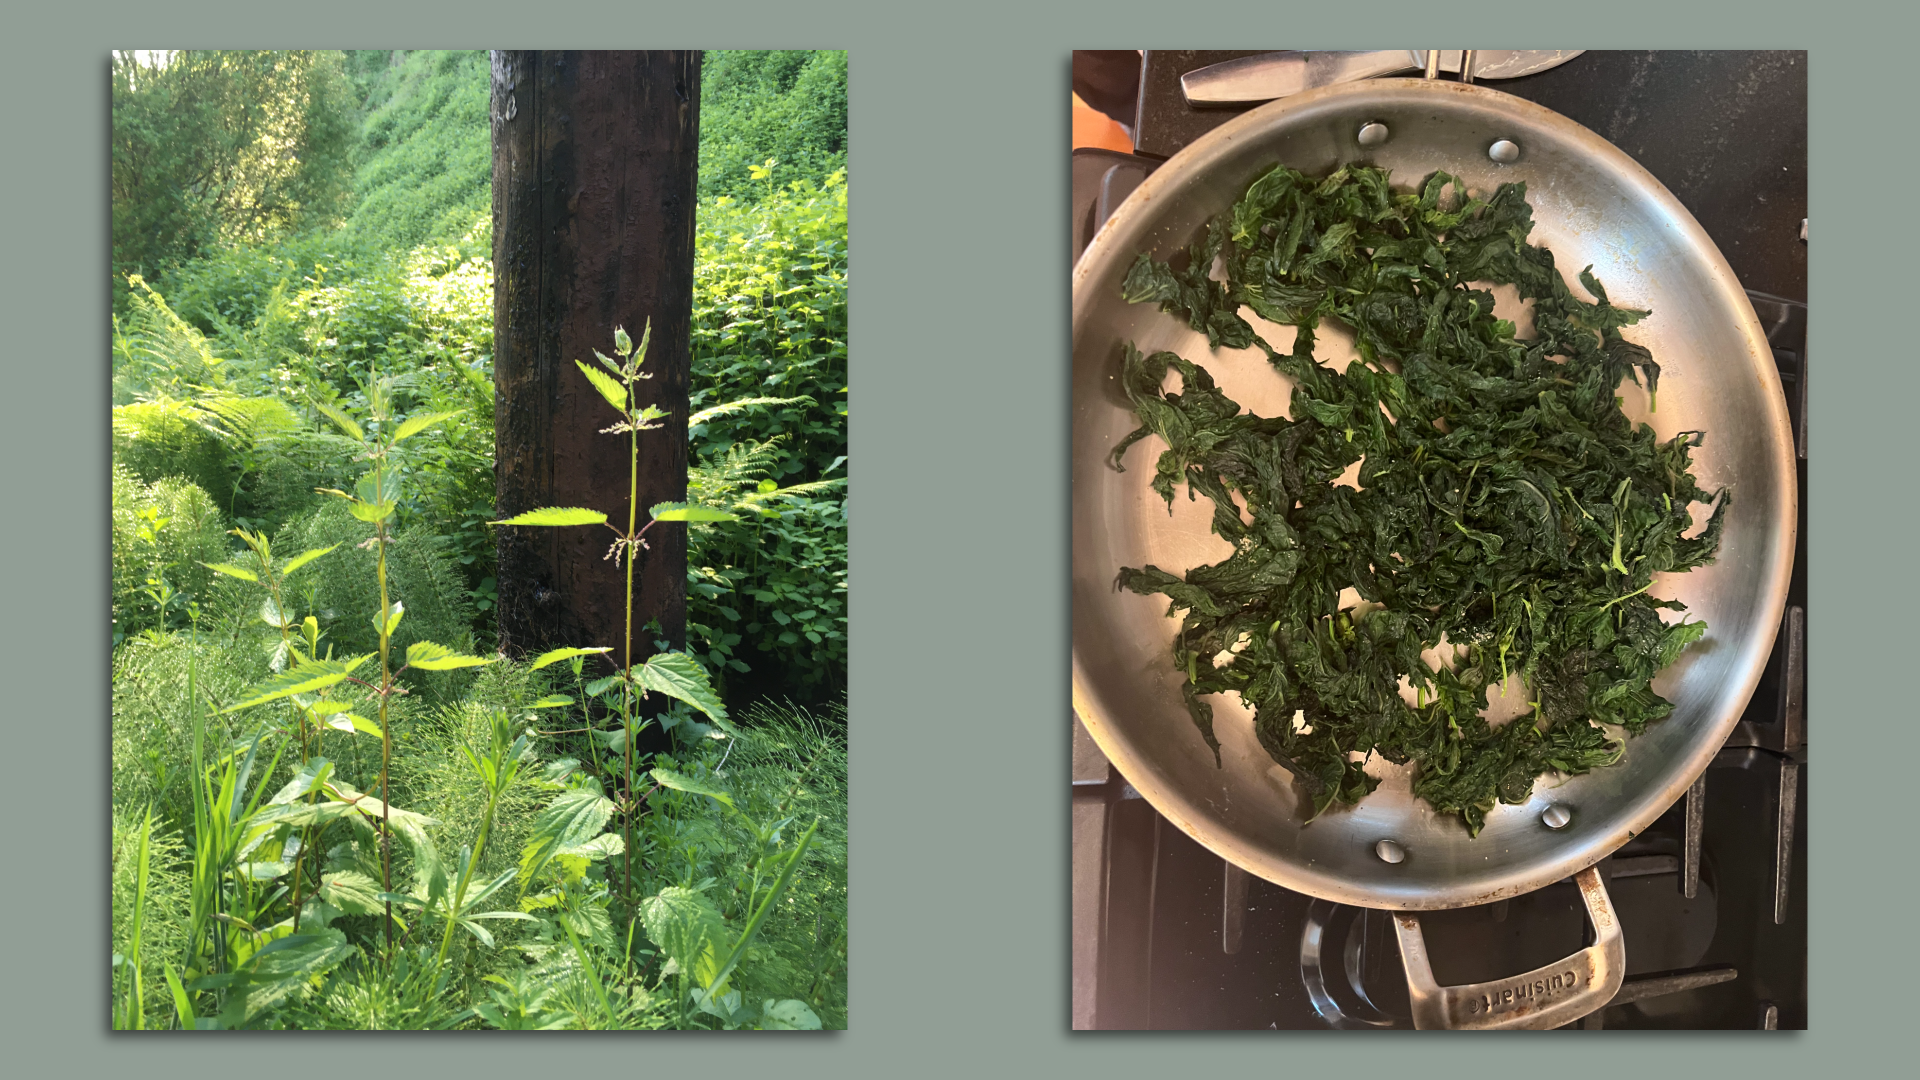 A photo of wild nettles growing, next to a photo of cooked nettles in a pan on the stove.